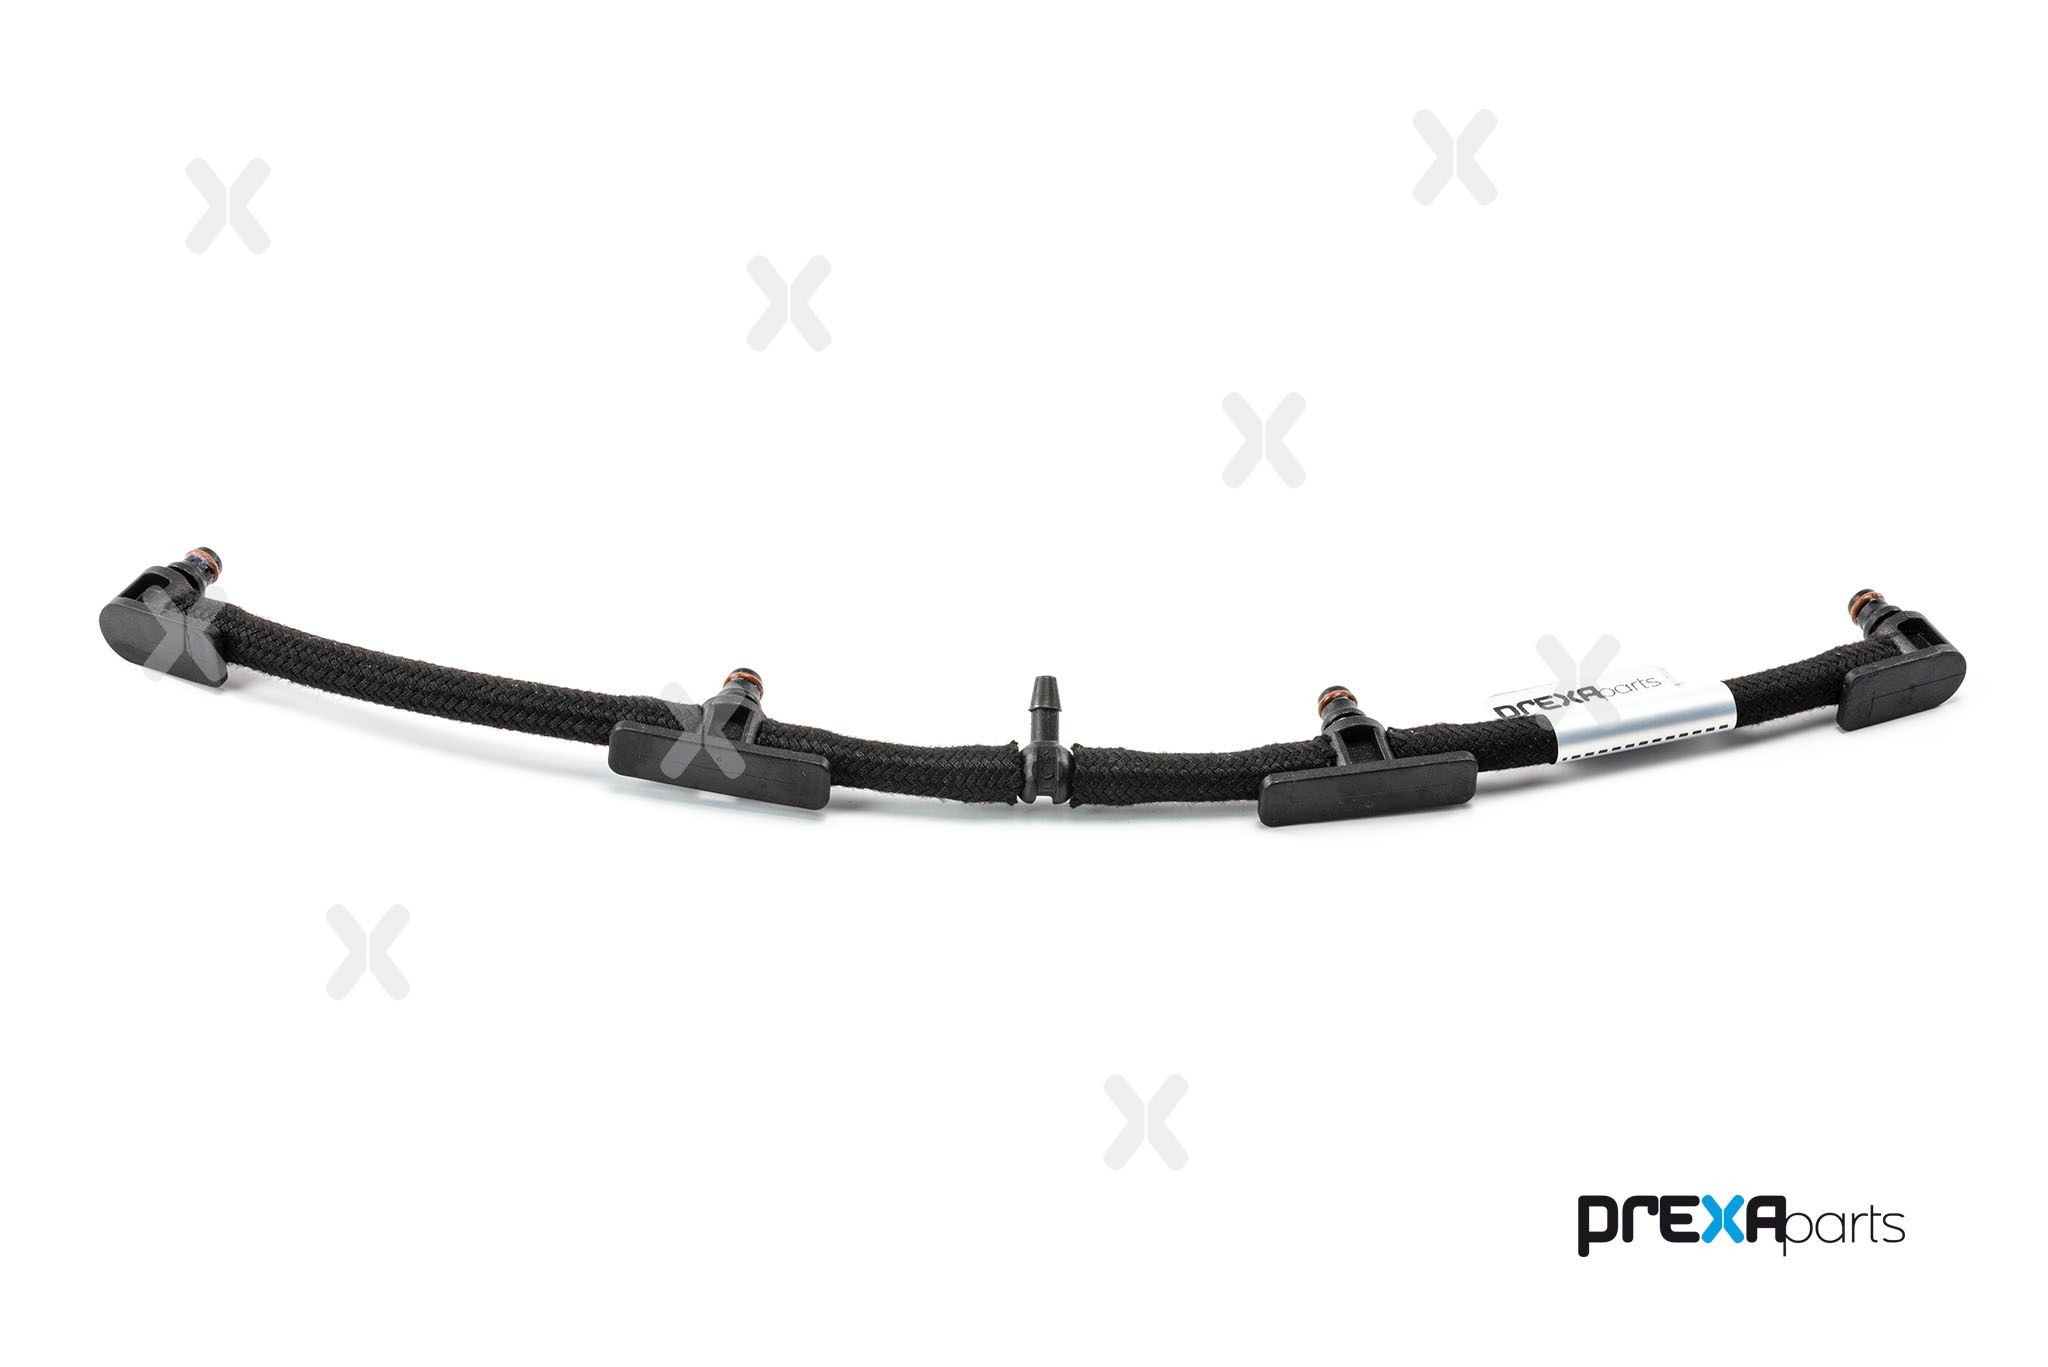 Original P150372 PREXAparts Hose, fuel overflow experience and price